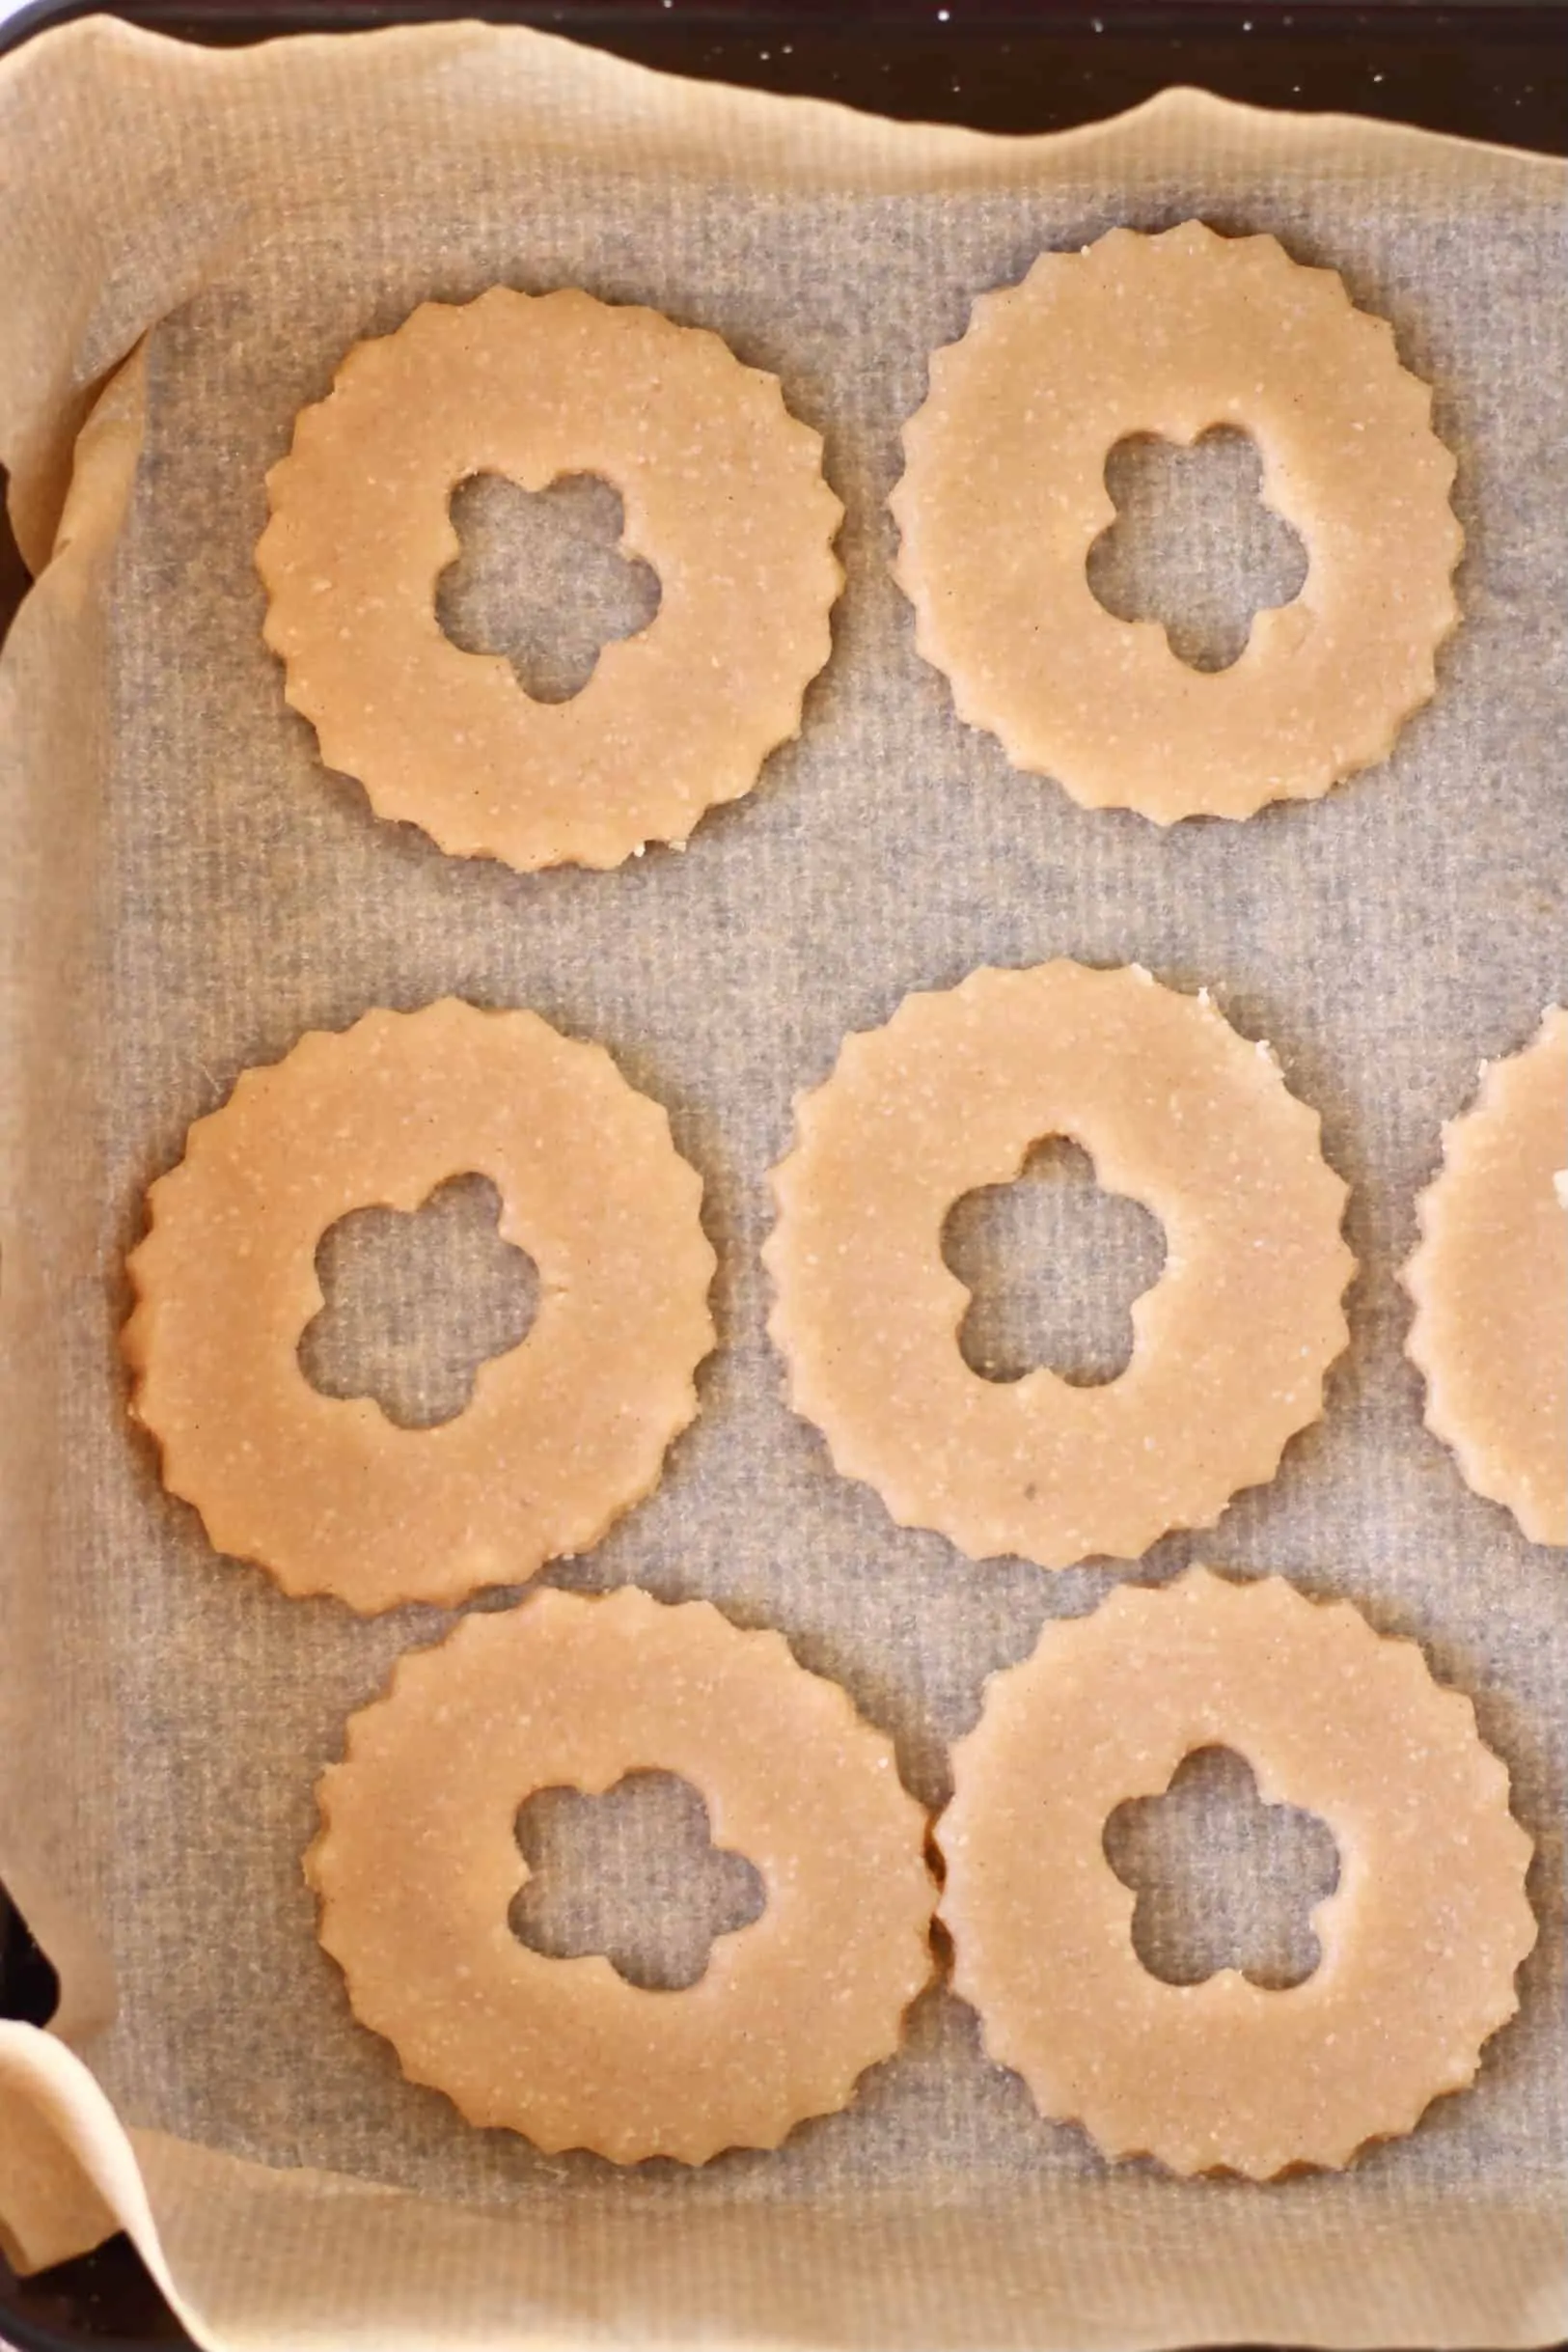 Six raw gluten-free vegan linzer cookie circles with flower-shaped windows on a baking tray lined with baking paper